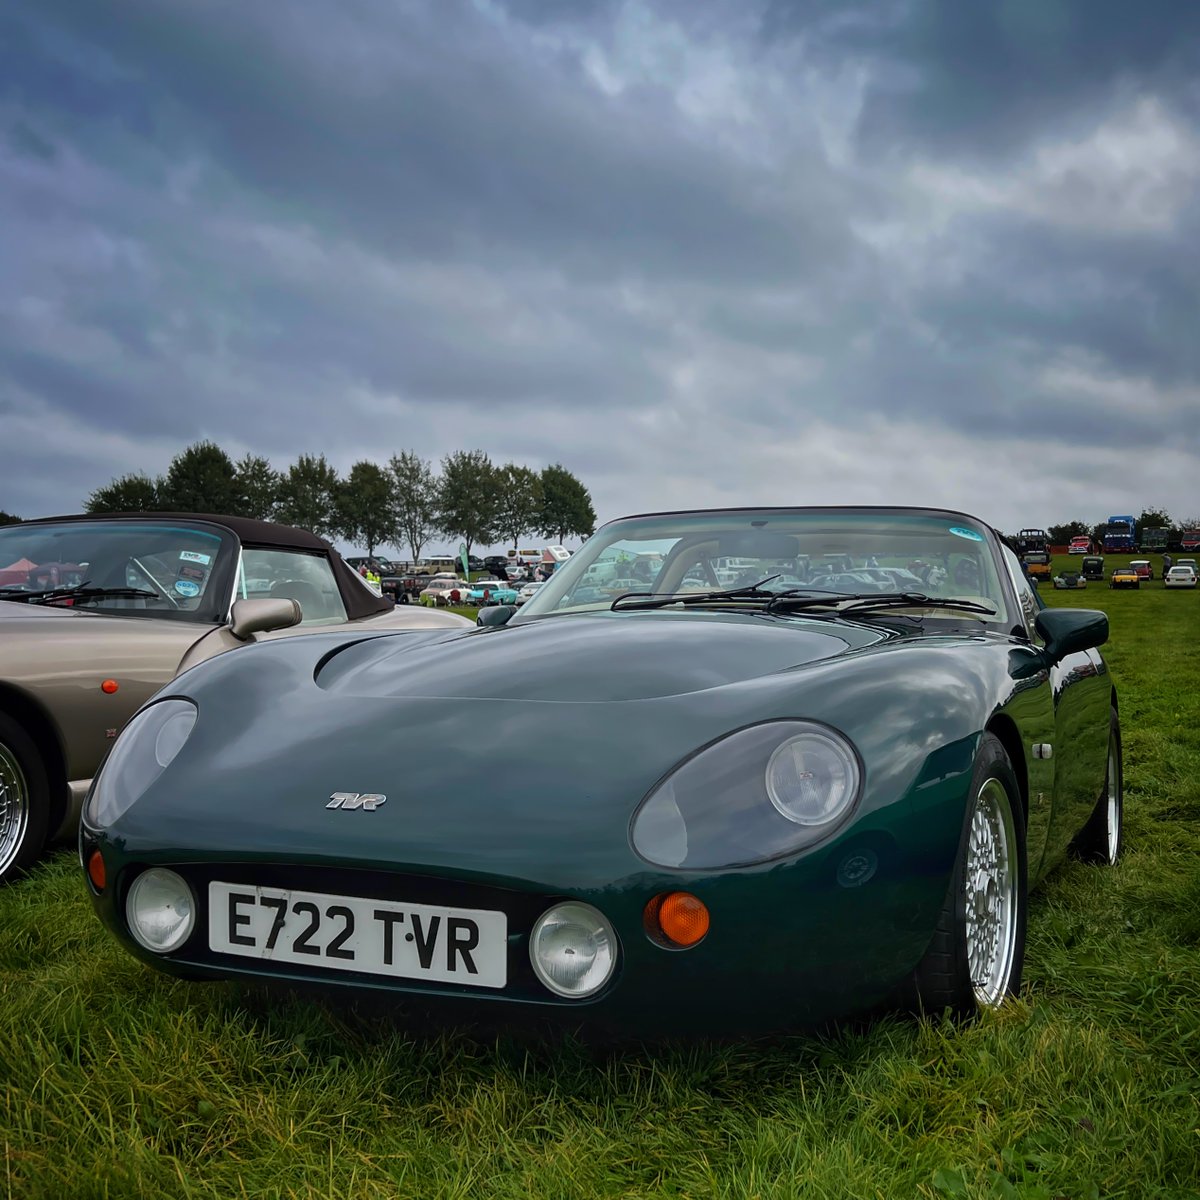 Sticking with the TVR theme - next to the Chimaera was a lovely Griffith

full-res downloads, prints, wall art and gifts in the #YorkHistoricVehicleGroup gallery on pmhimages.com

#TVR #Griffith #car #cars #carenthusiast #carenthusiasts #petrolheads #britishmotors